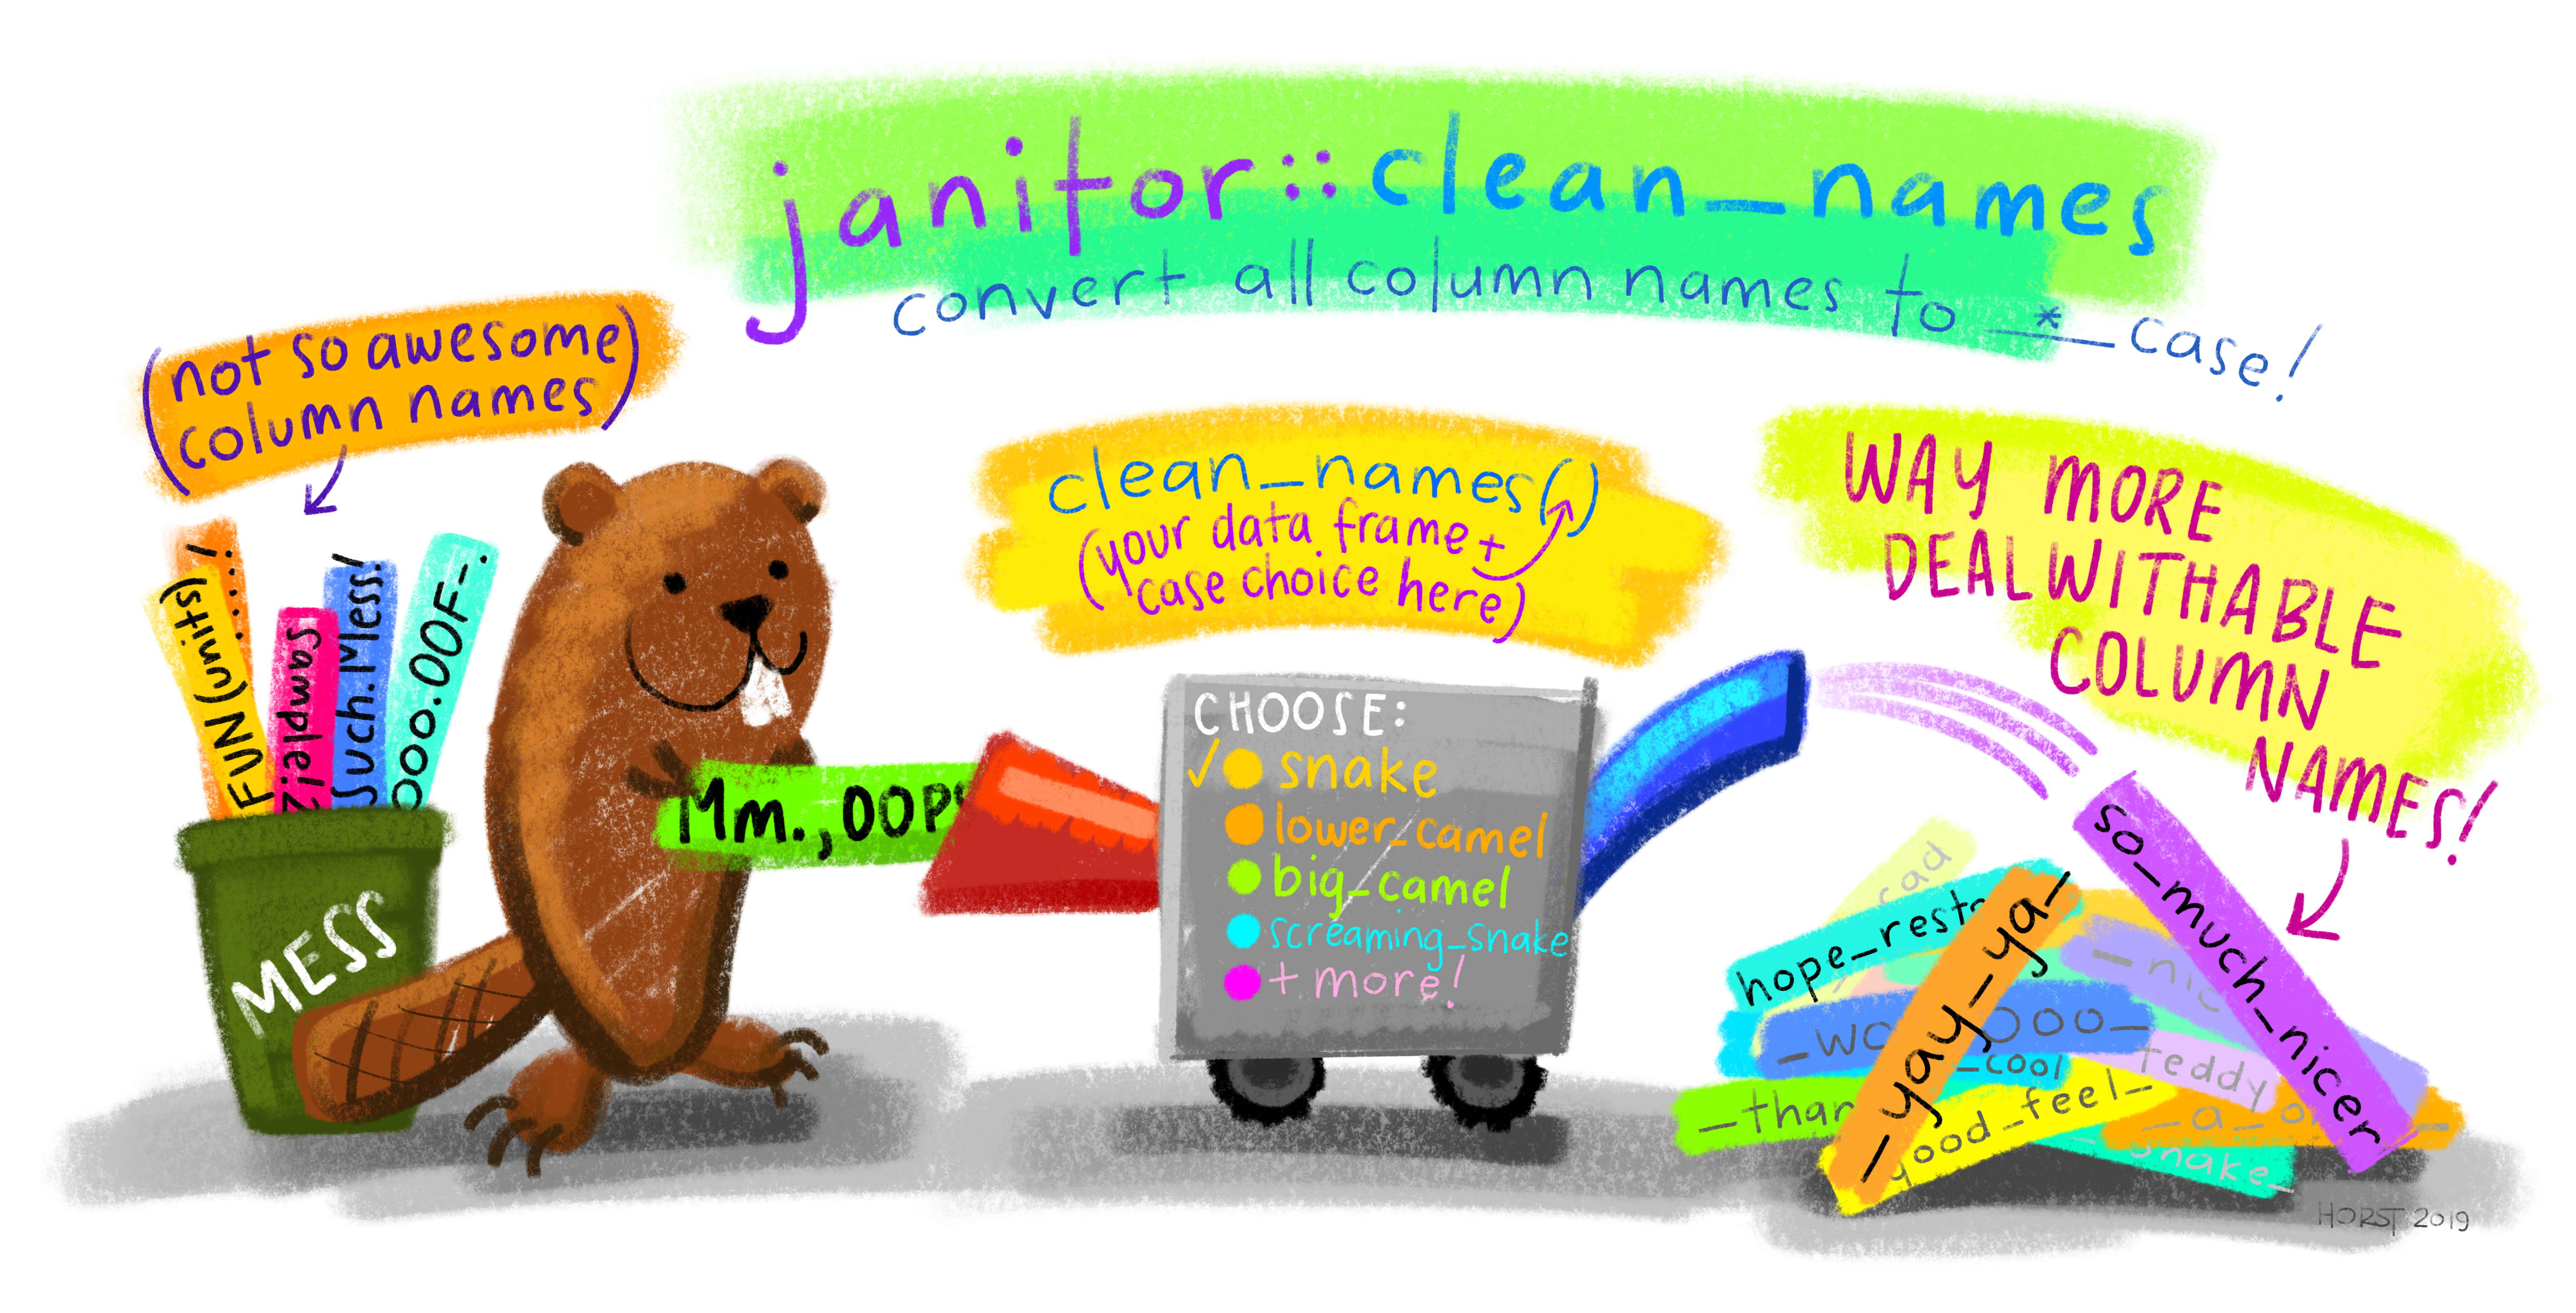 janitor::clean_names() example. Source: [Allison Horst data science and stats illustrations](https://github.com/allisonhorst/stats-illustrations)